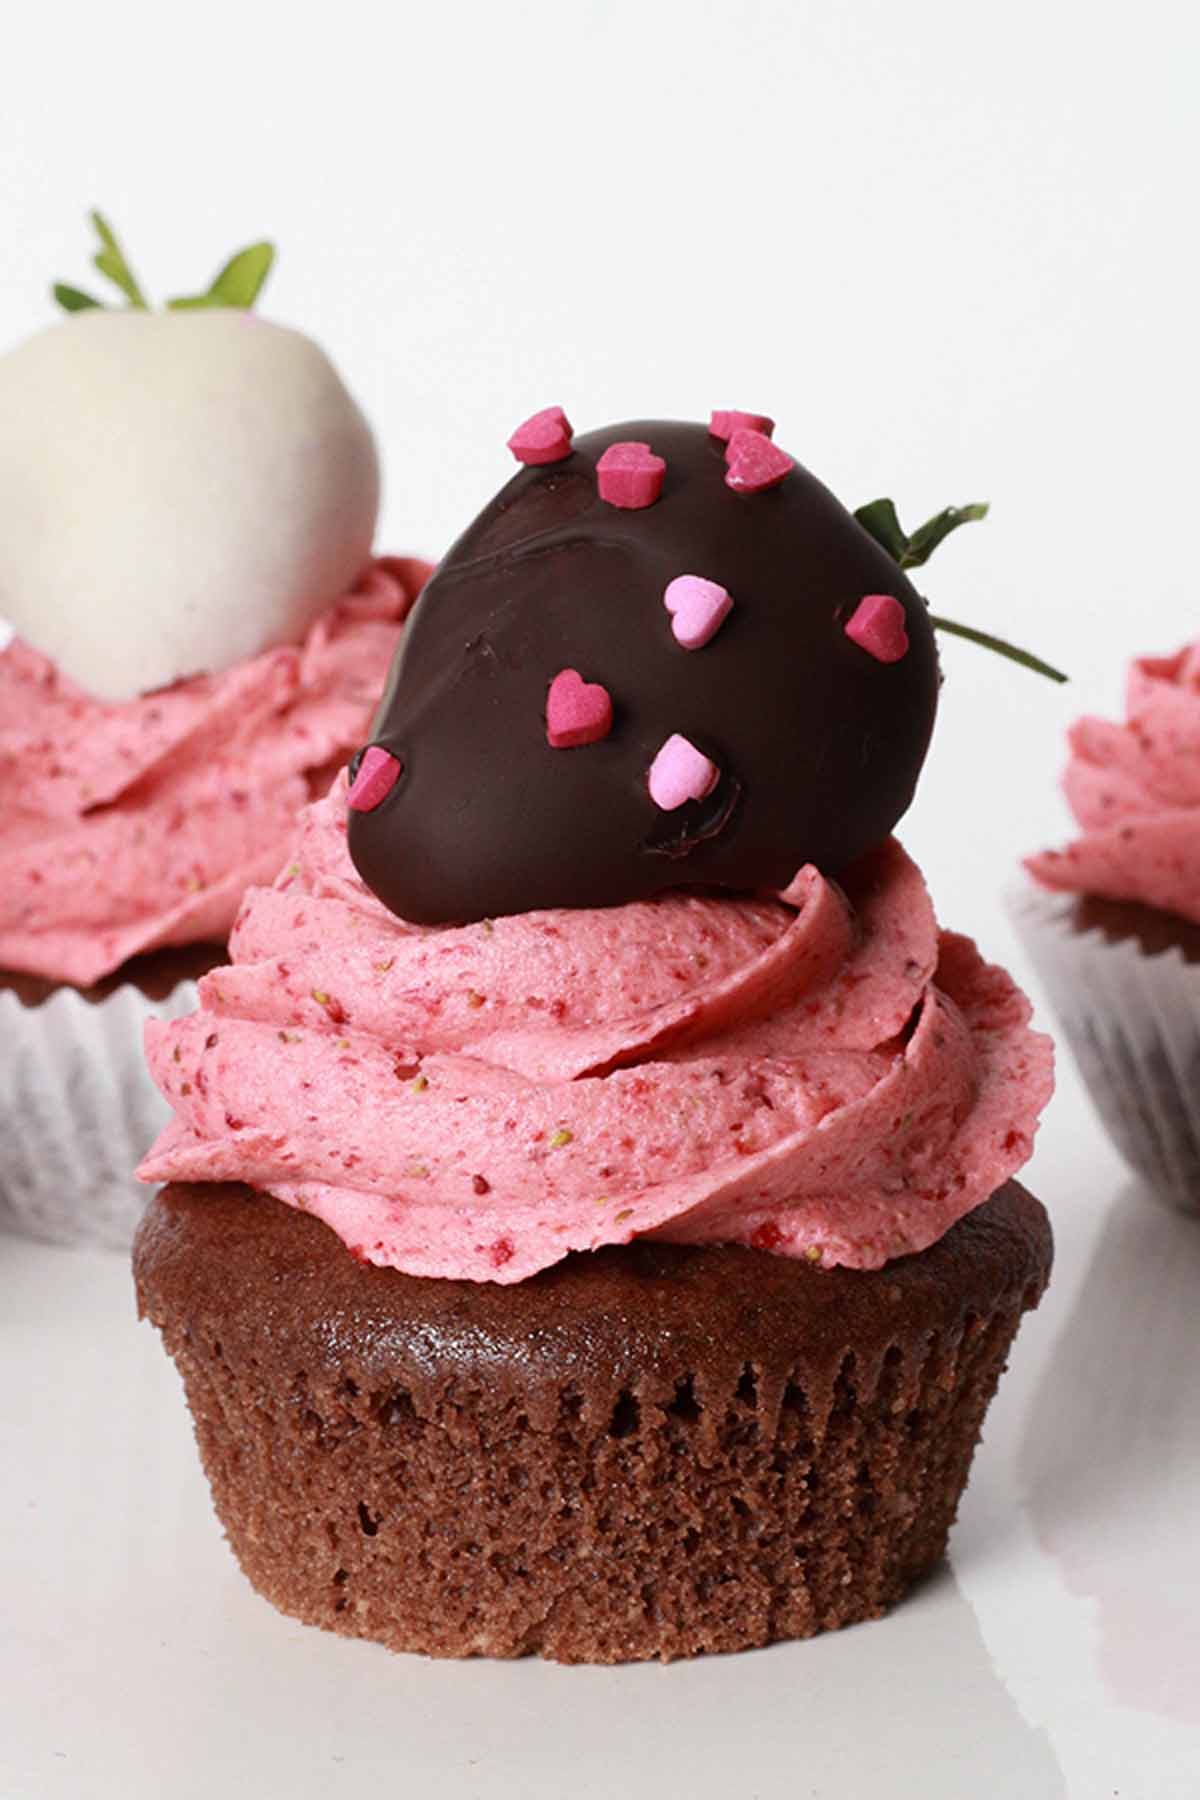 Chocolate Strawberry On Top Of Frosted Cupcake